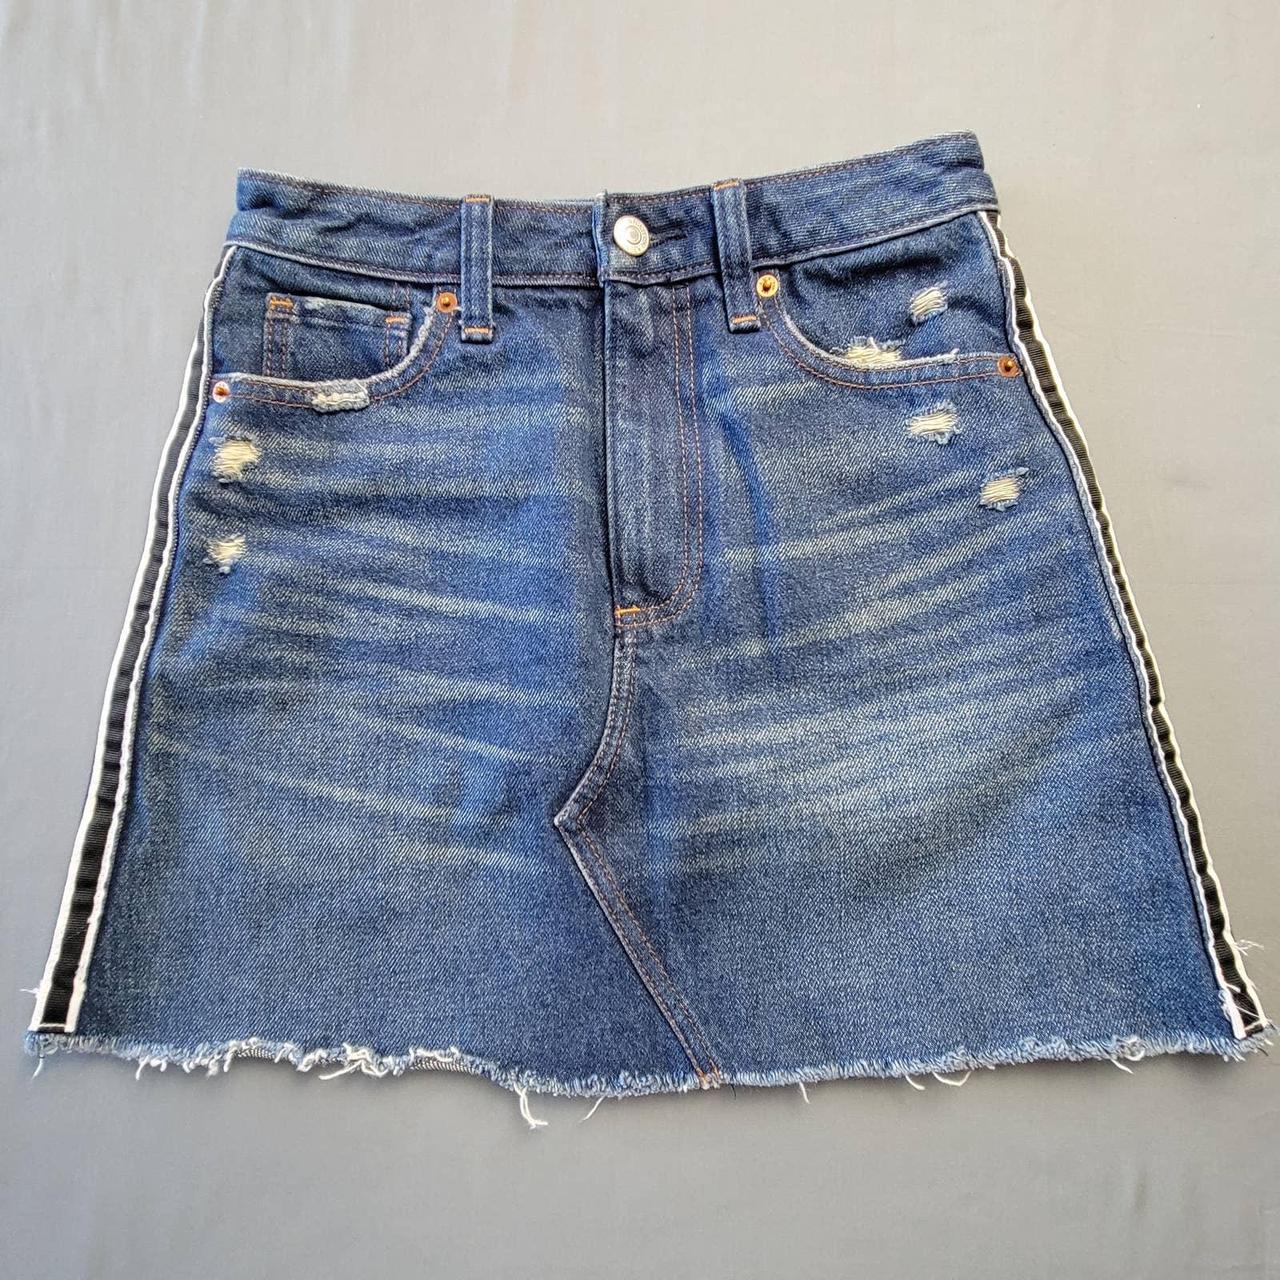 Abercrombie & Fitch Women's Blue Skirt